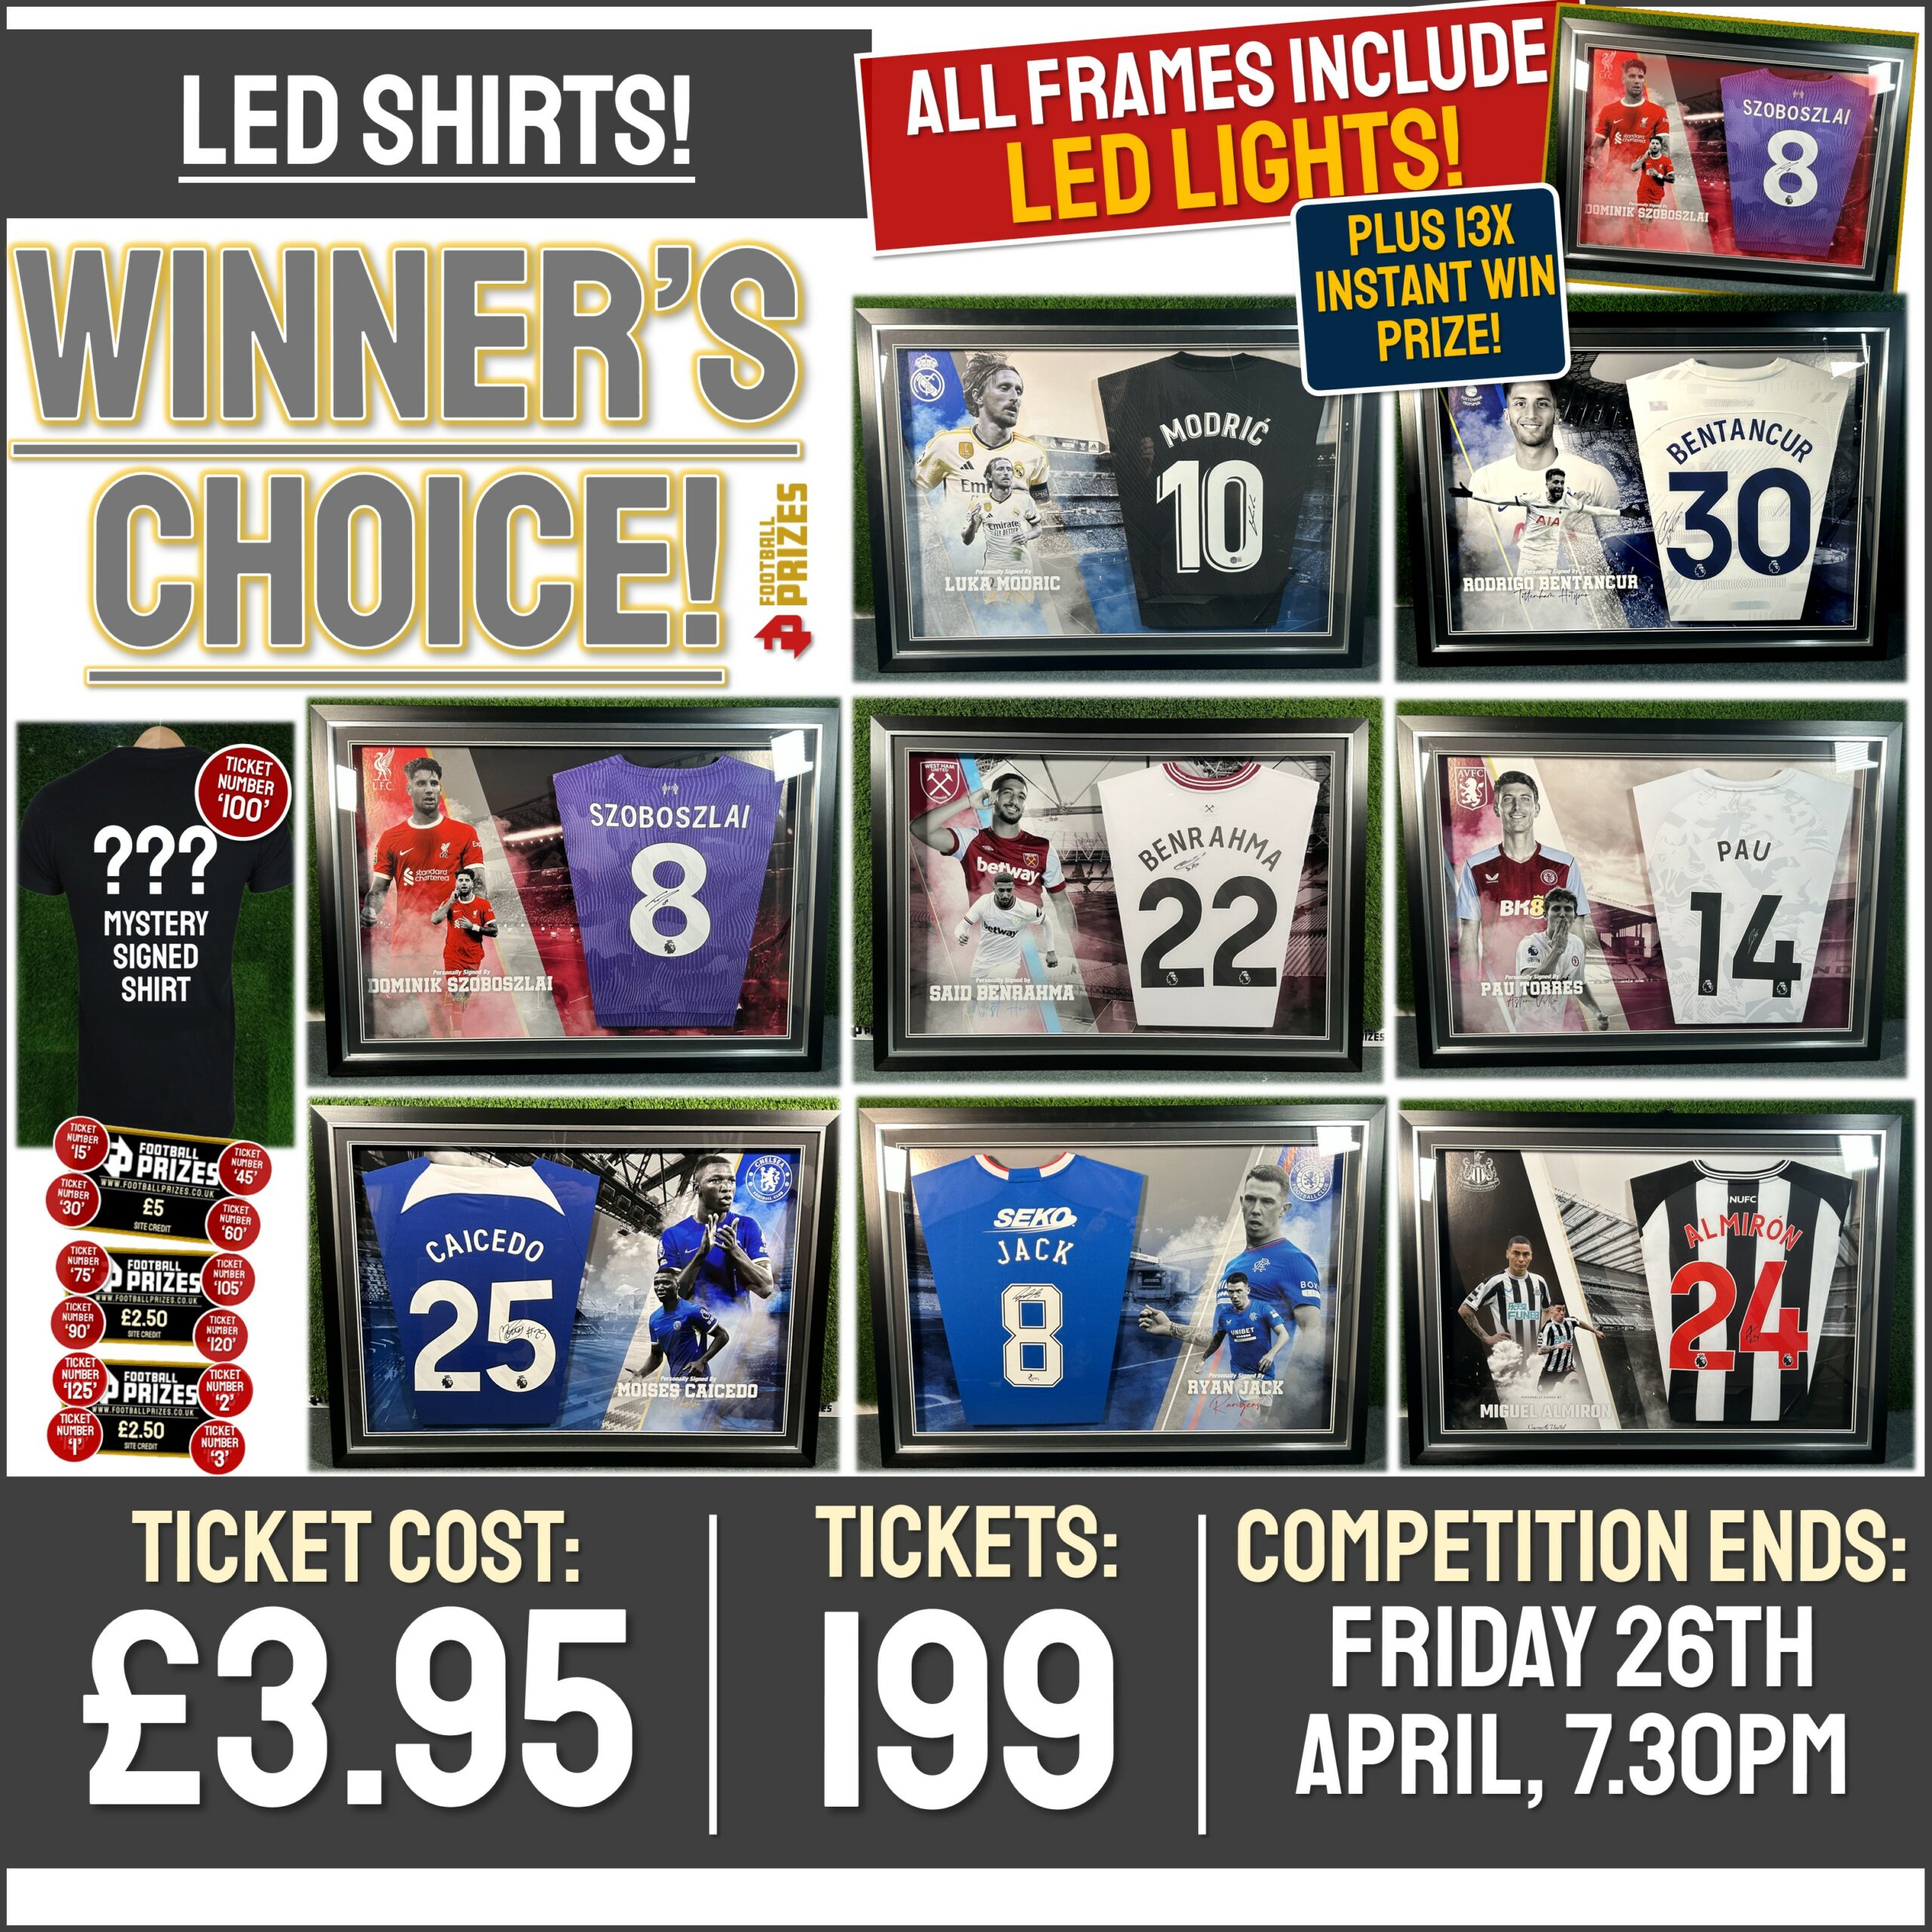 Winner’s Choice Competition! Win ANY of these EIGHT Signed & Custom Framed Shirts (with LED Lights) for just £3.95!